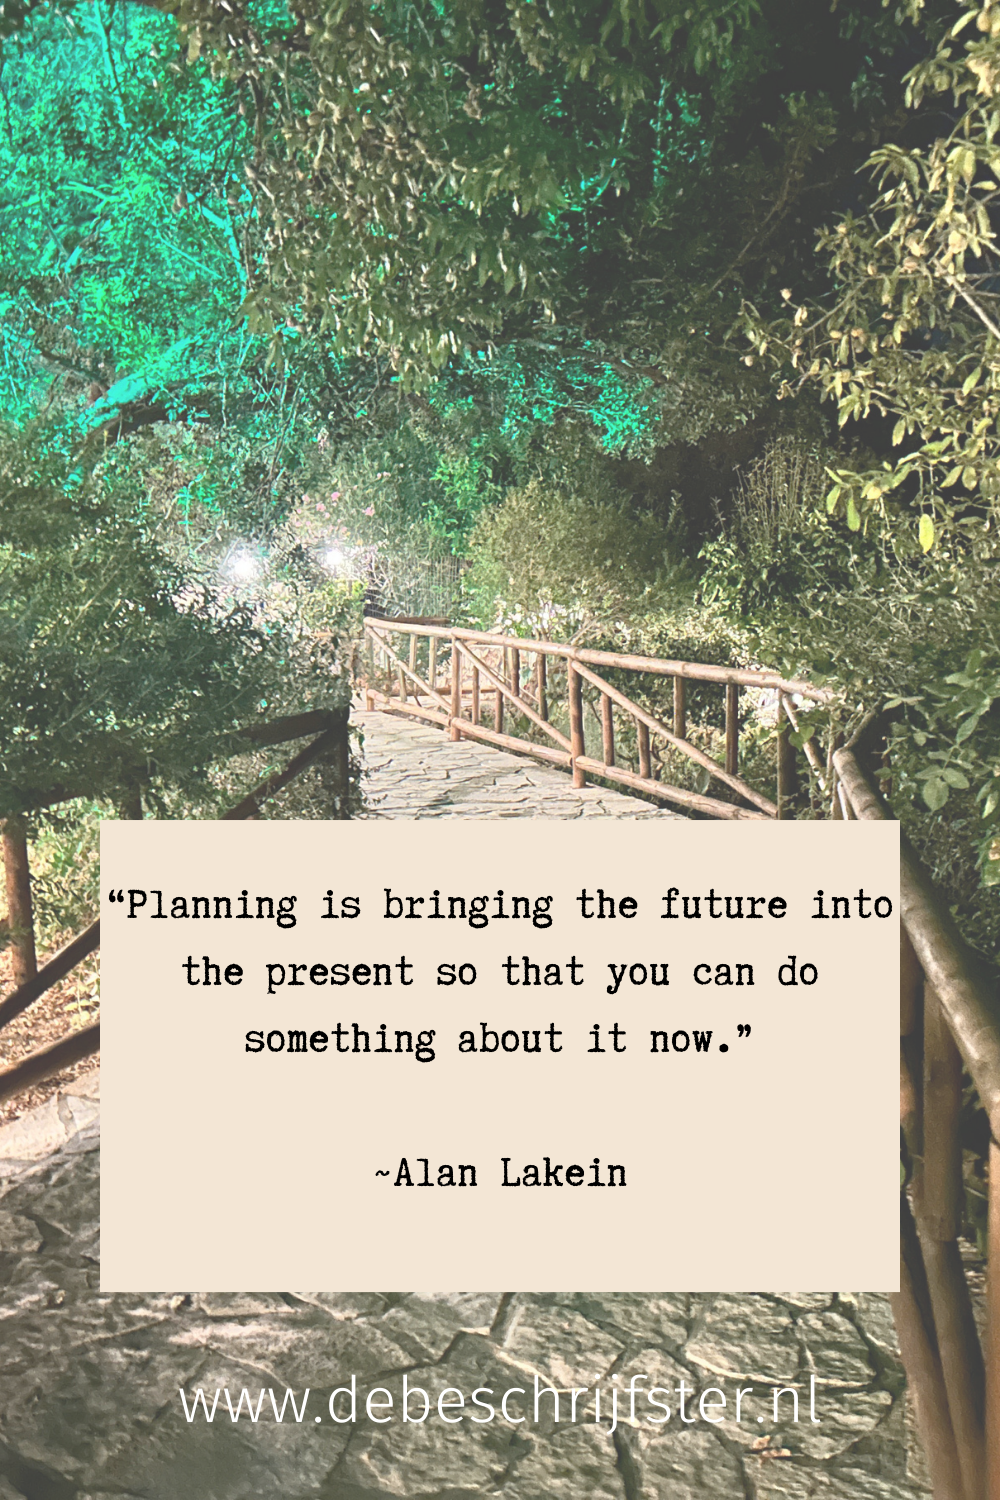 ‘Planning is bringing the future into the present so that you can do something about it now.’ Alan Lakein